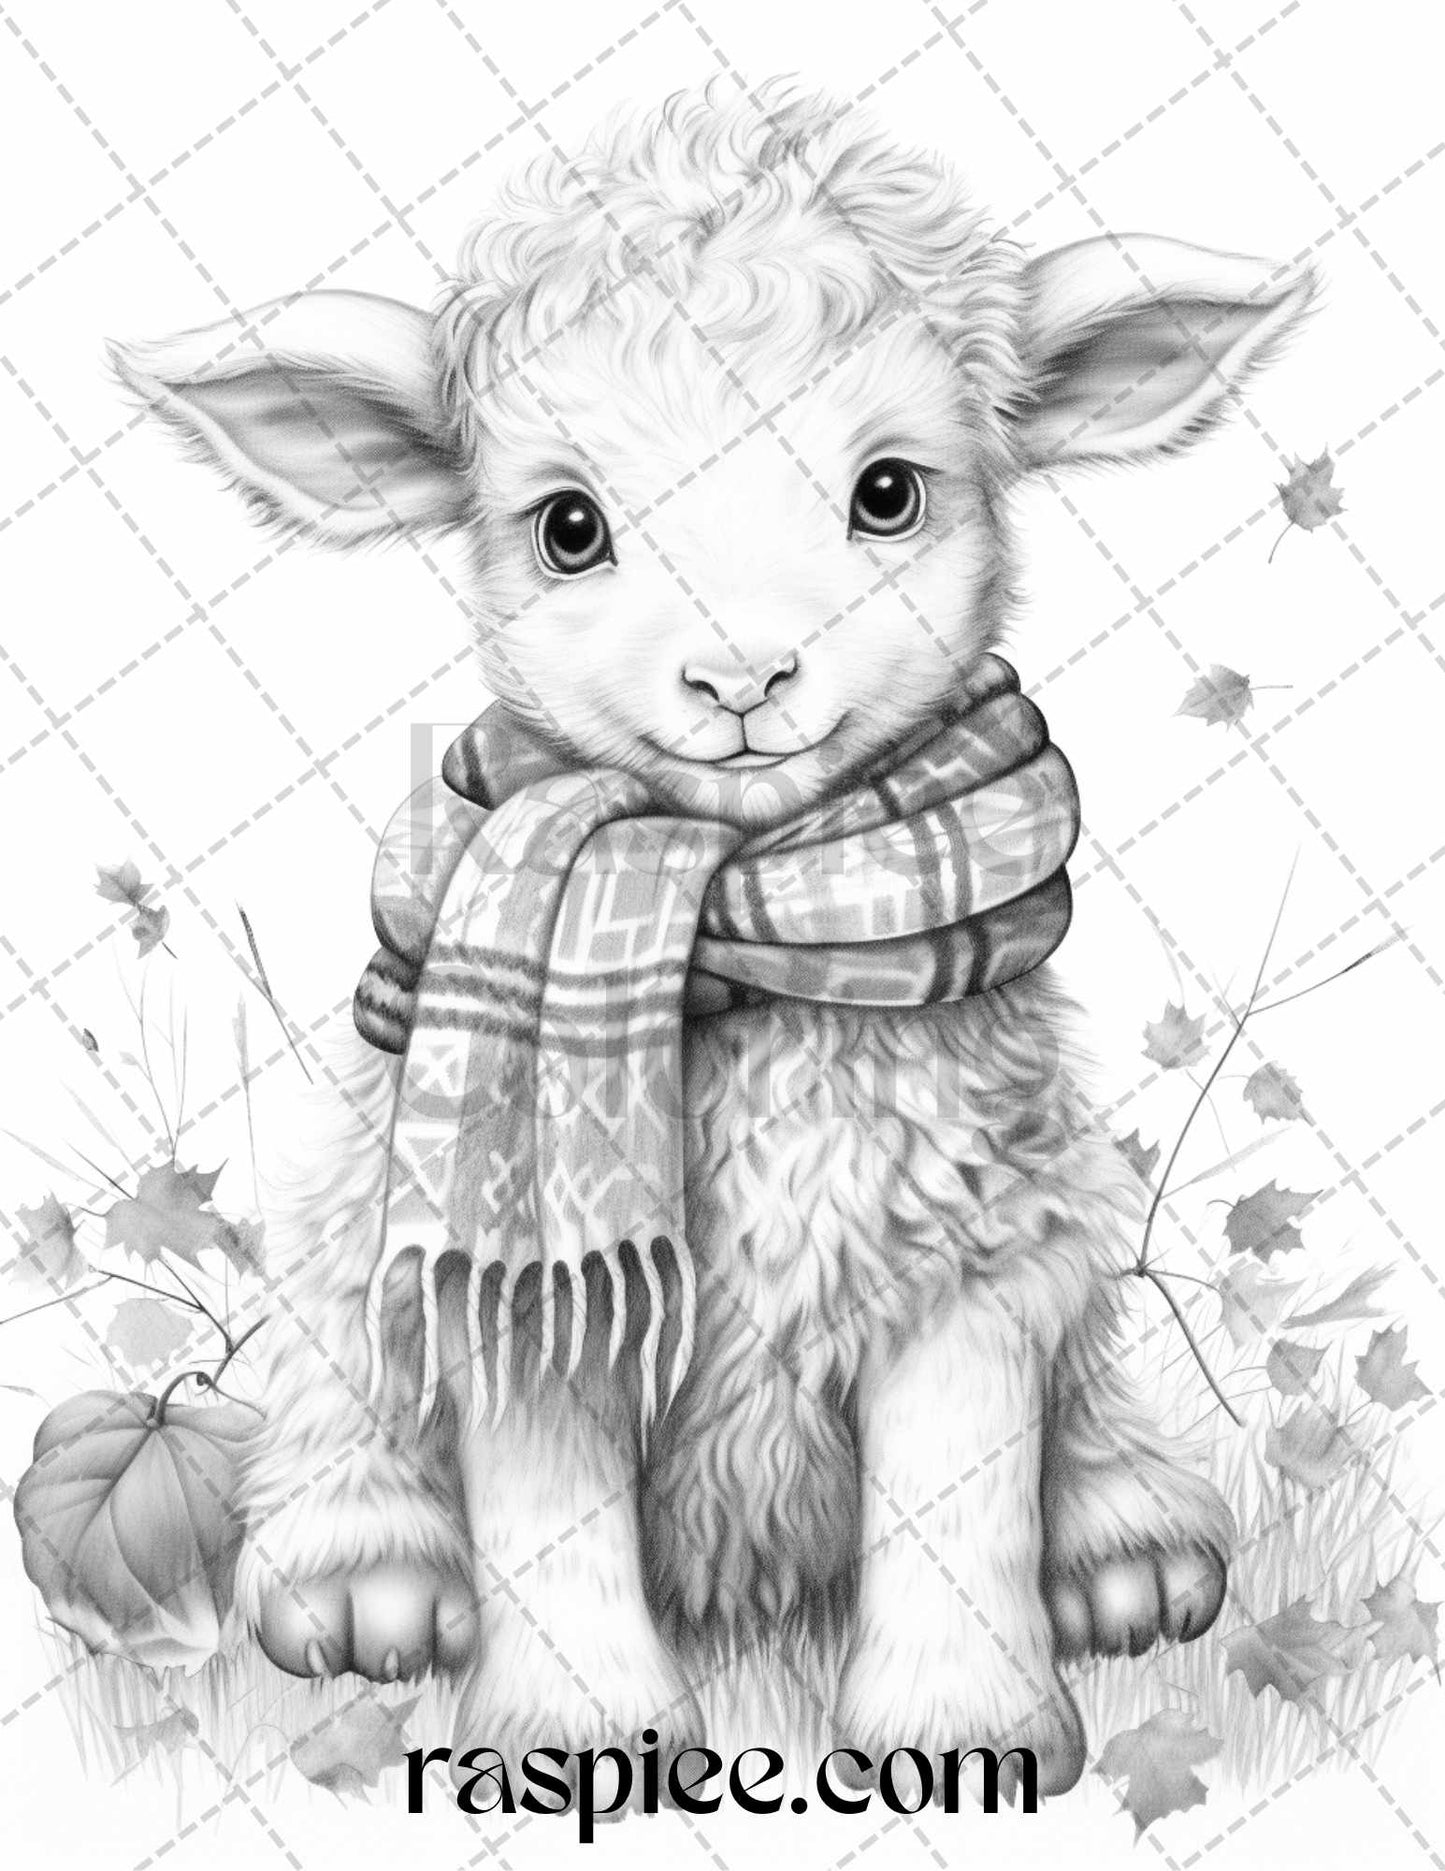 40 Cute Fall Animals Grayscale Coloring Pages Printable for Adults and Kids, PDF File Instant Download